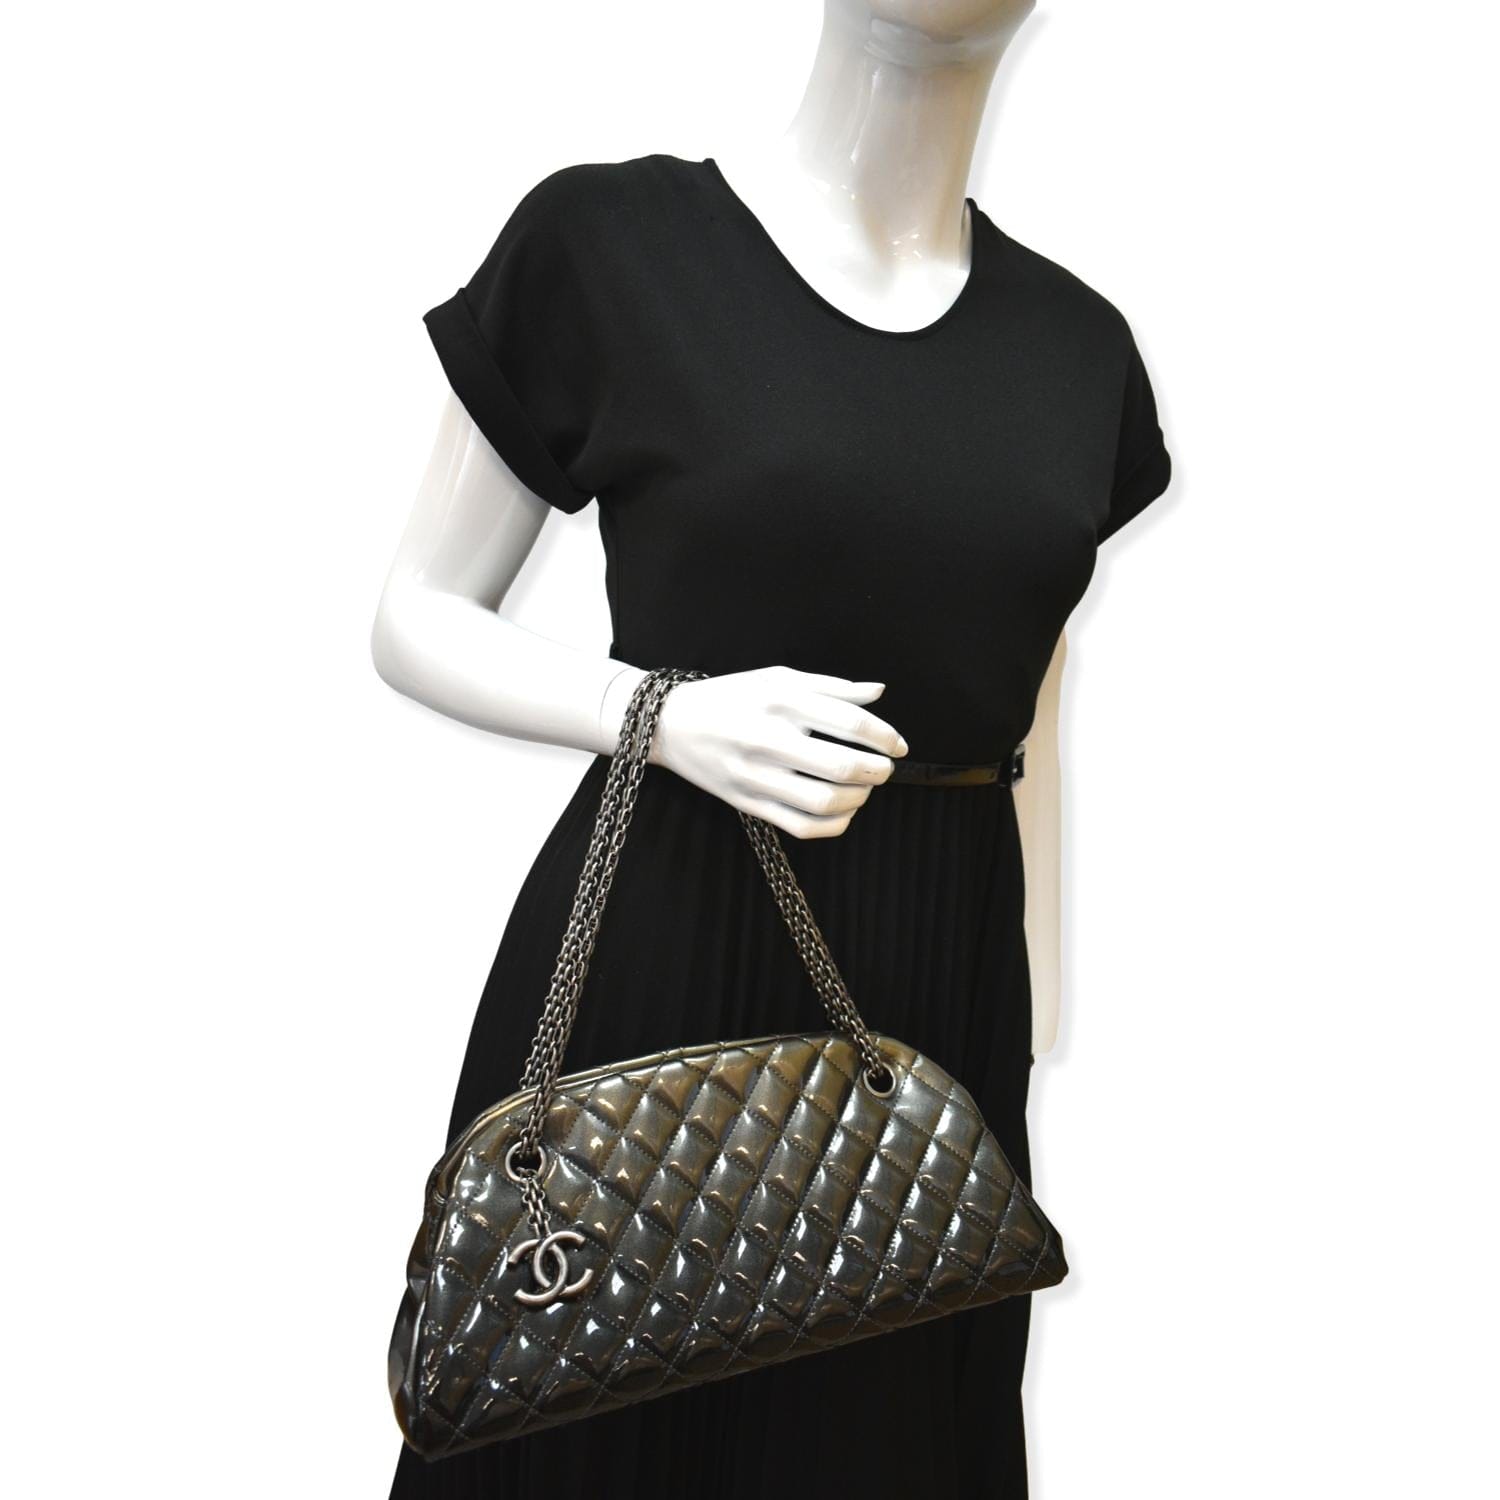 Chanel black quilted patent cruise bowling bag (just mademoiselle)